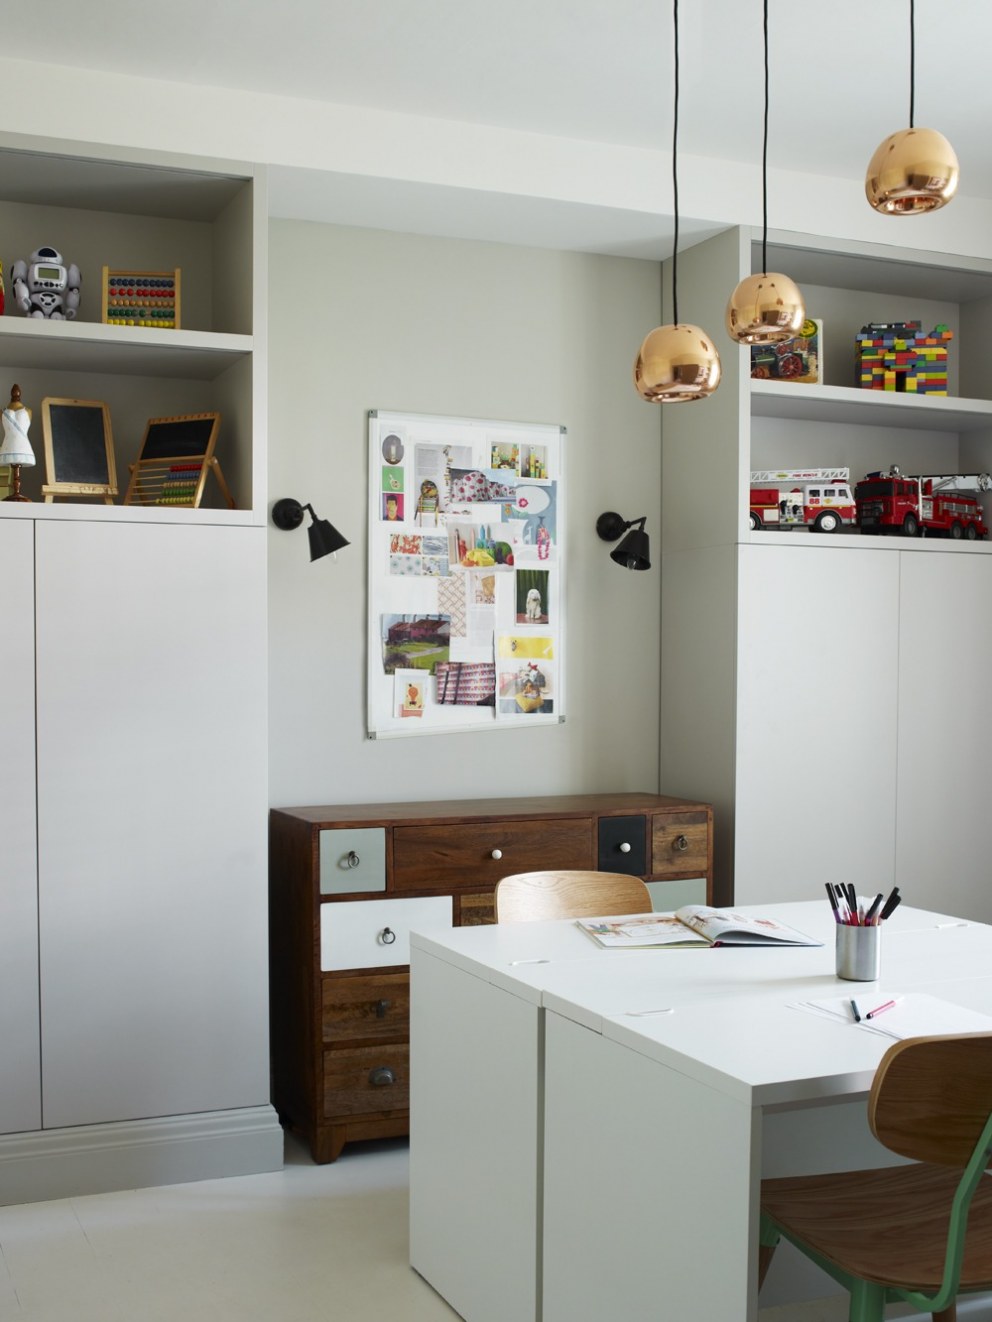 Arts and Crafts home in North London | Children's Study | Interior Designers